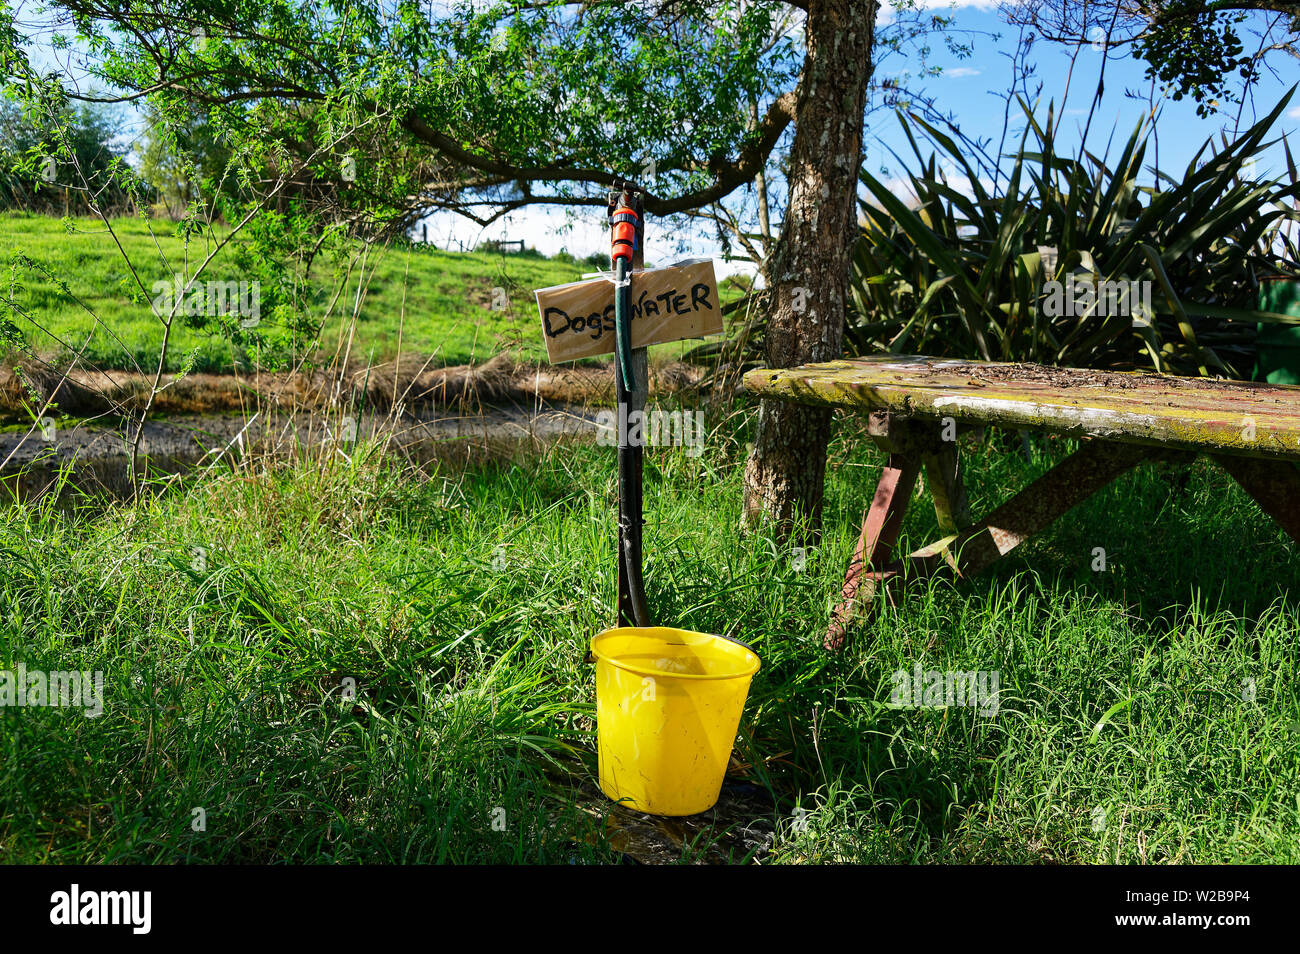 A yellow bucket sits under a tap with a sign saying Dogs Drinking Water in a public park. Stock Photo